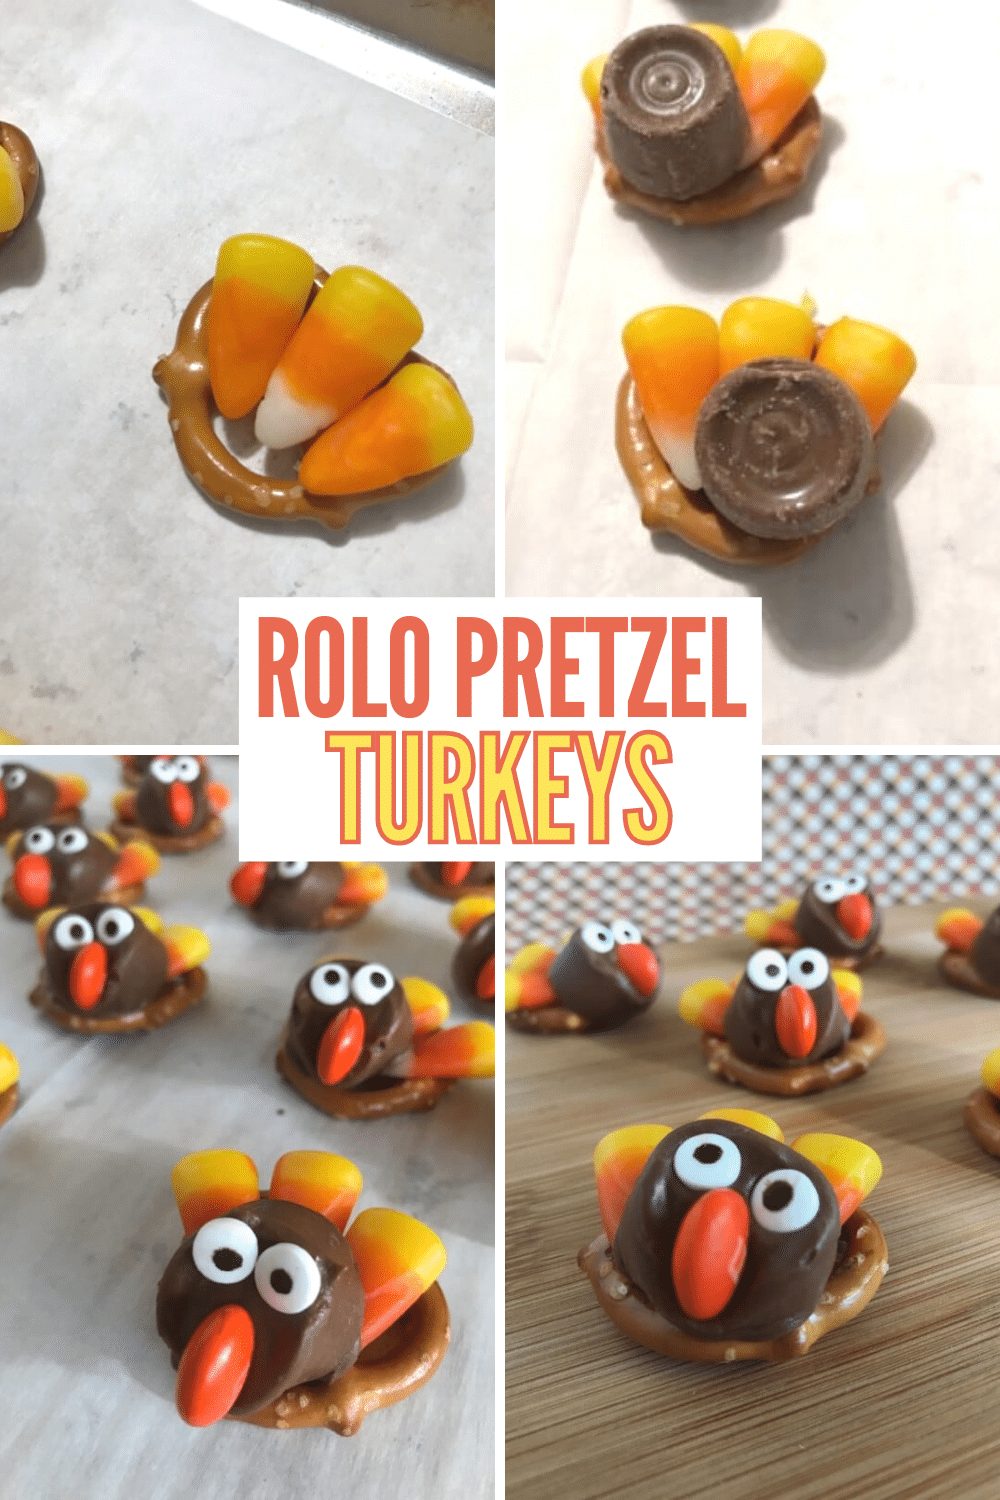 How cute are these Rolo Pretzel Turkeys?! And they're so easy to make! #Thanksgiving #funfood via @wondermomwannab